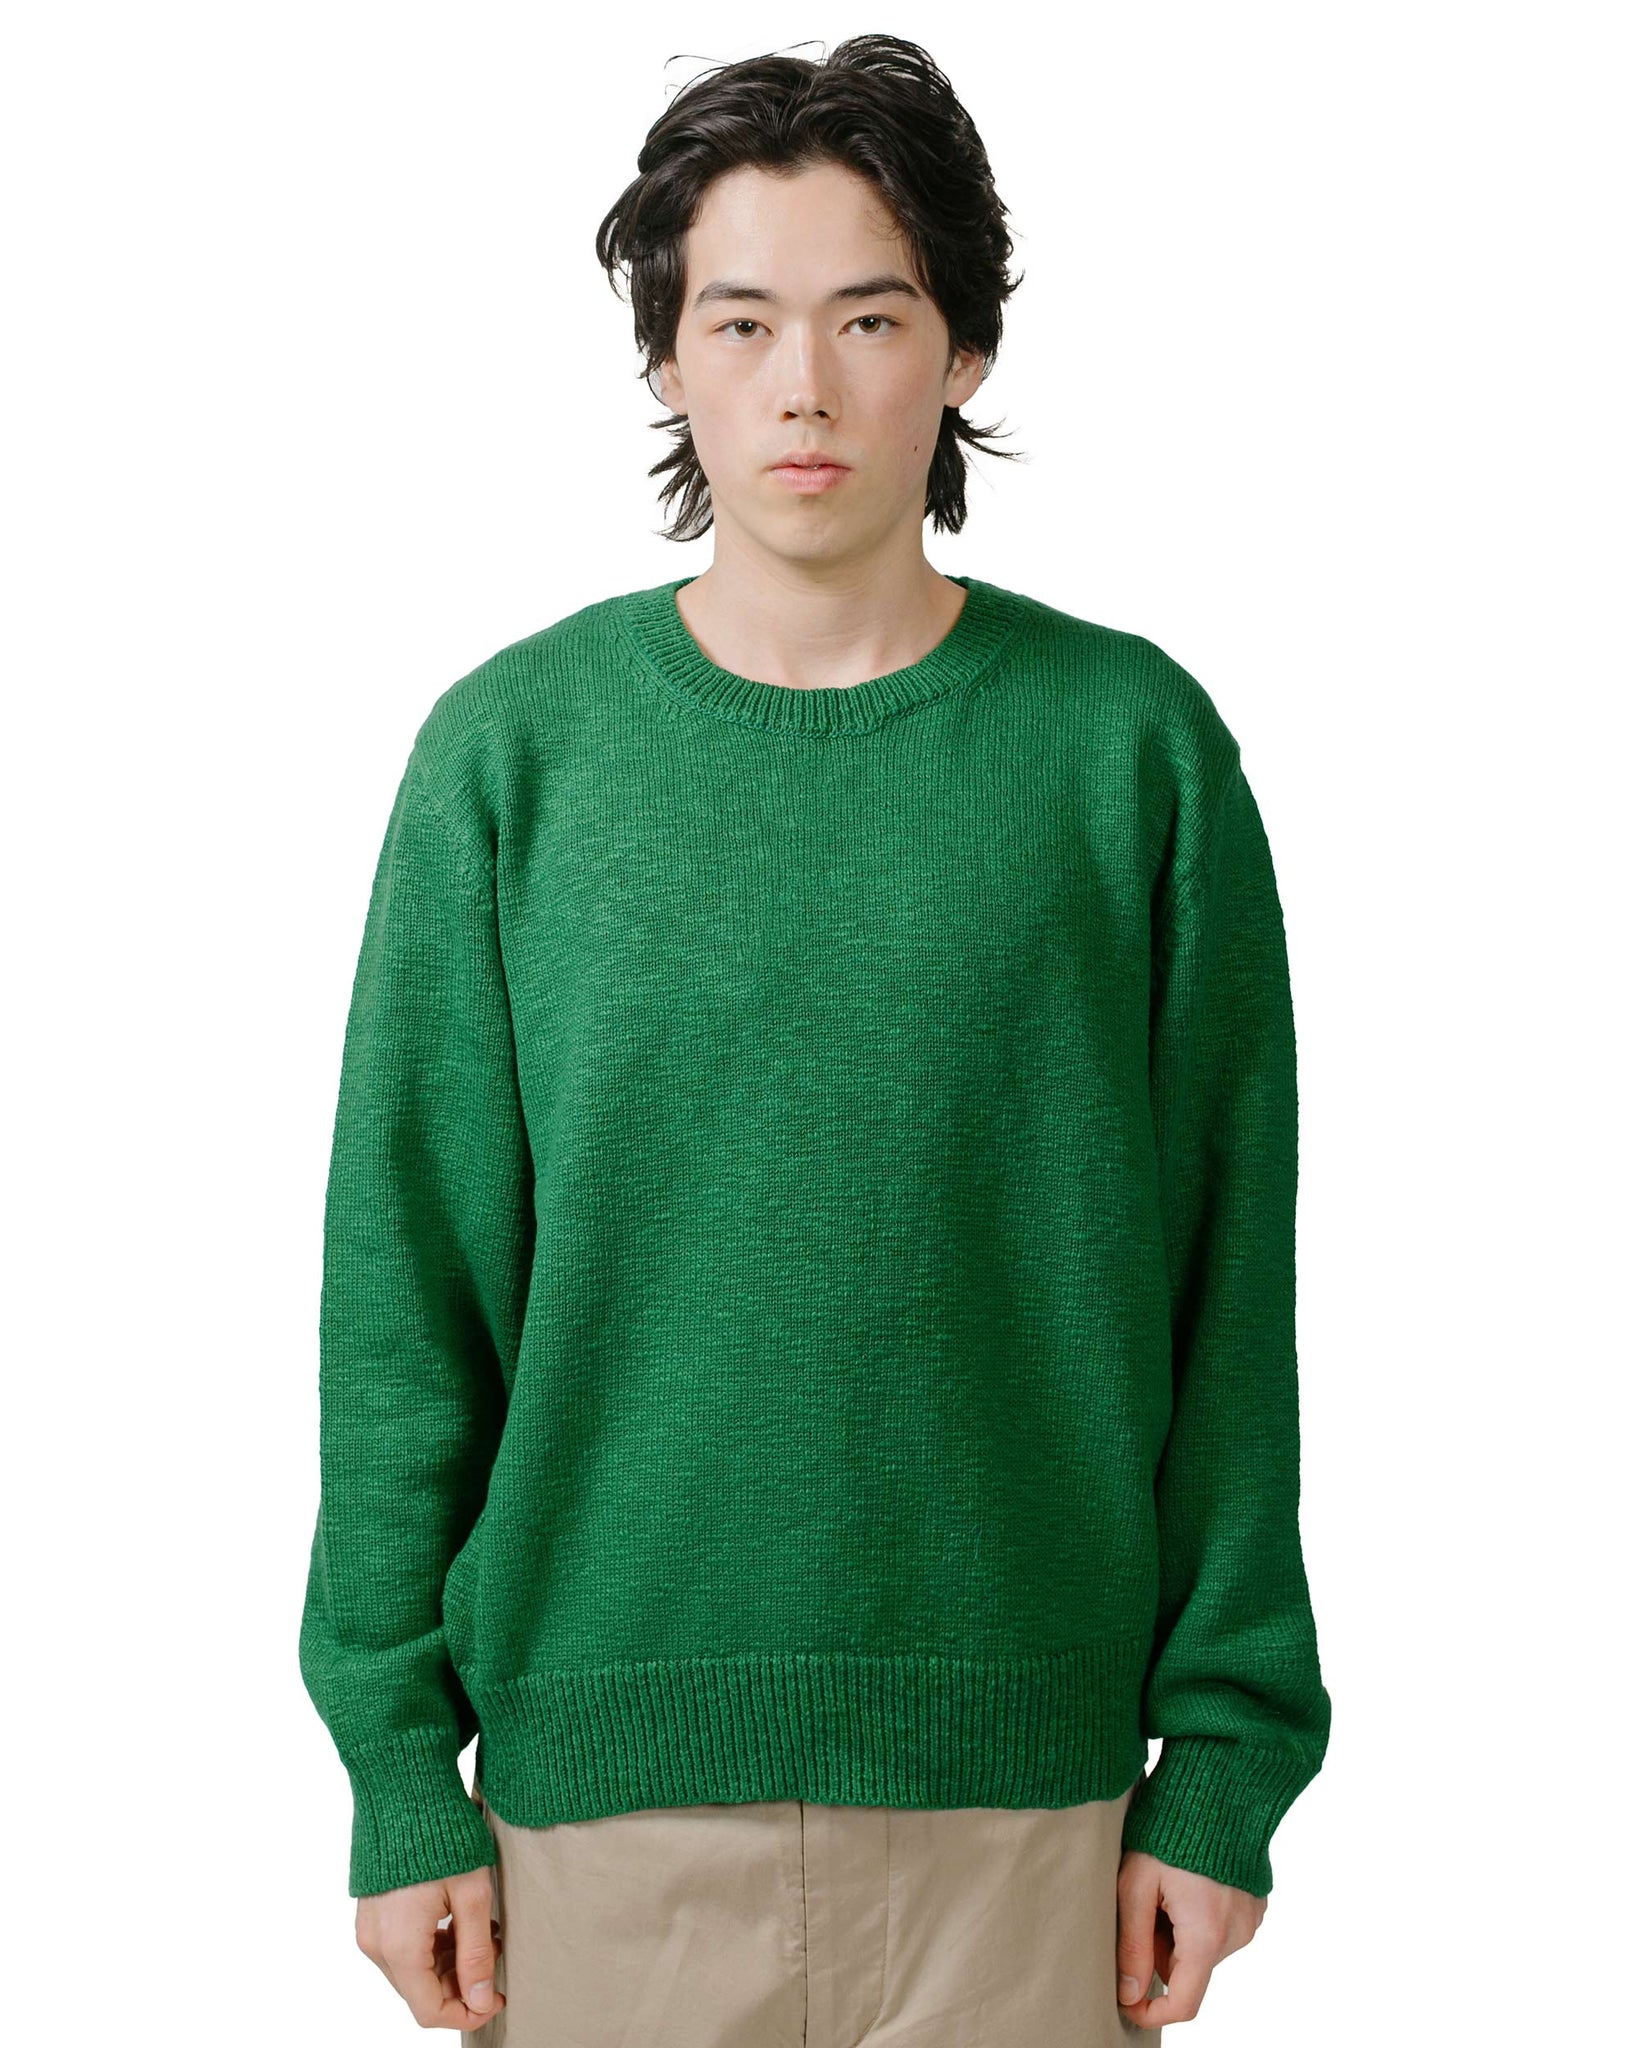 The Real McCoy's MC23014 Cotton Crewneck Sweater Green model front